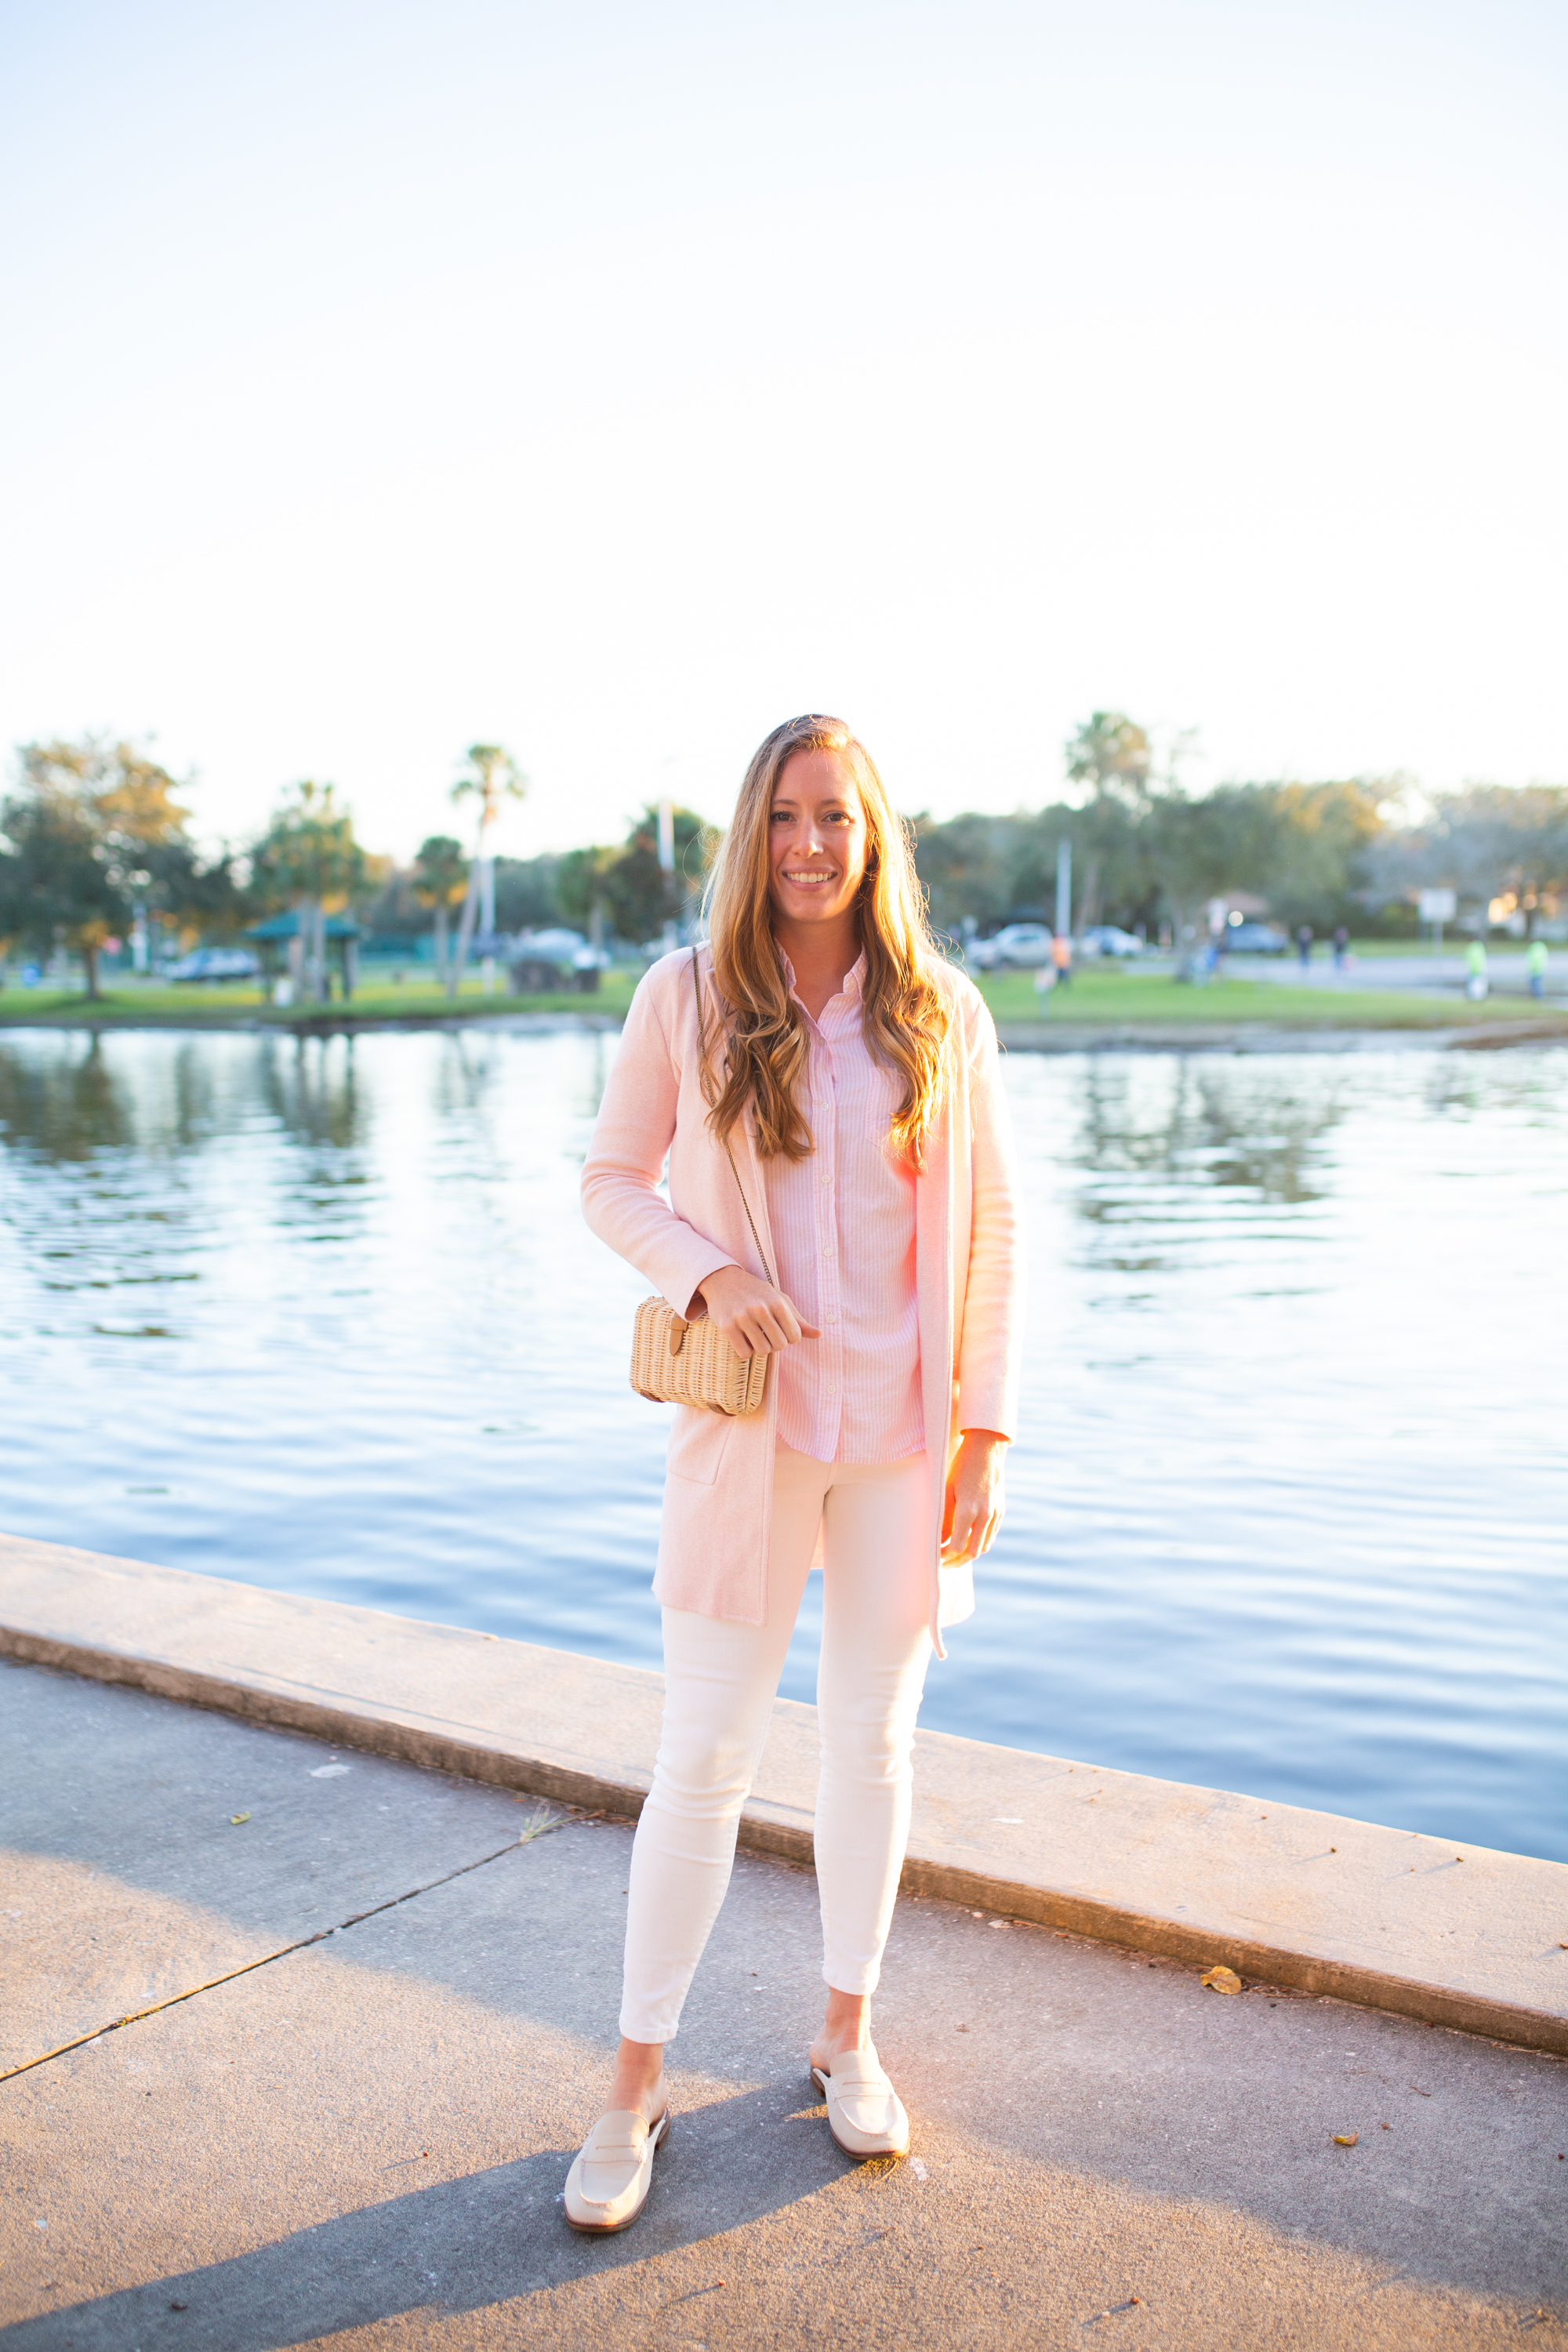 How to Style a Sweater Blazer / White Jeans / Mules / Classic Outfit Inspiration / Winter Outfit Idea / T-Shirt with Blazer Outfit - Sunshine Style, A Florida Based Fashion and LIfeStyle Blog by Katie 